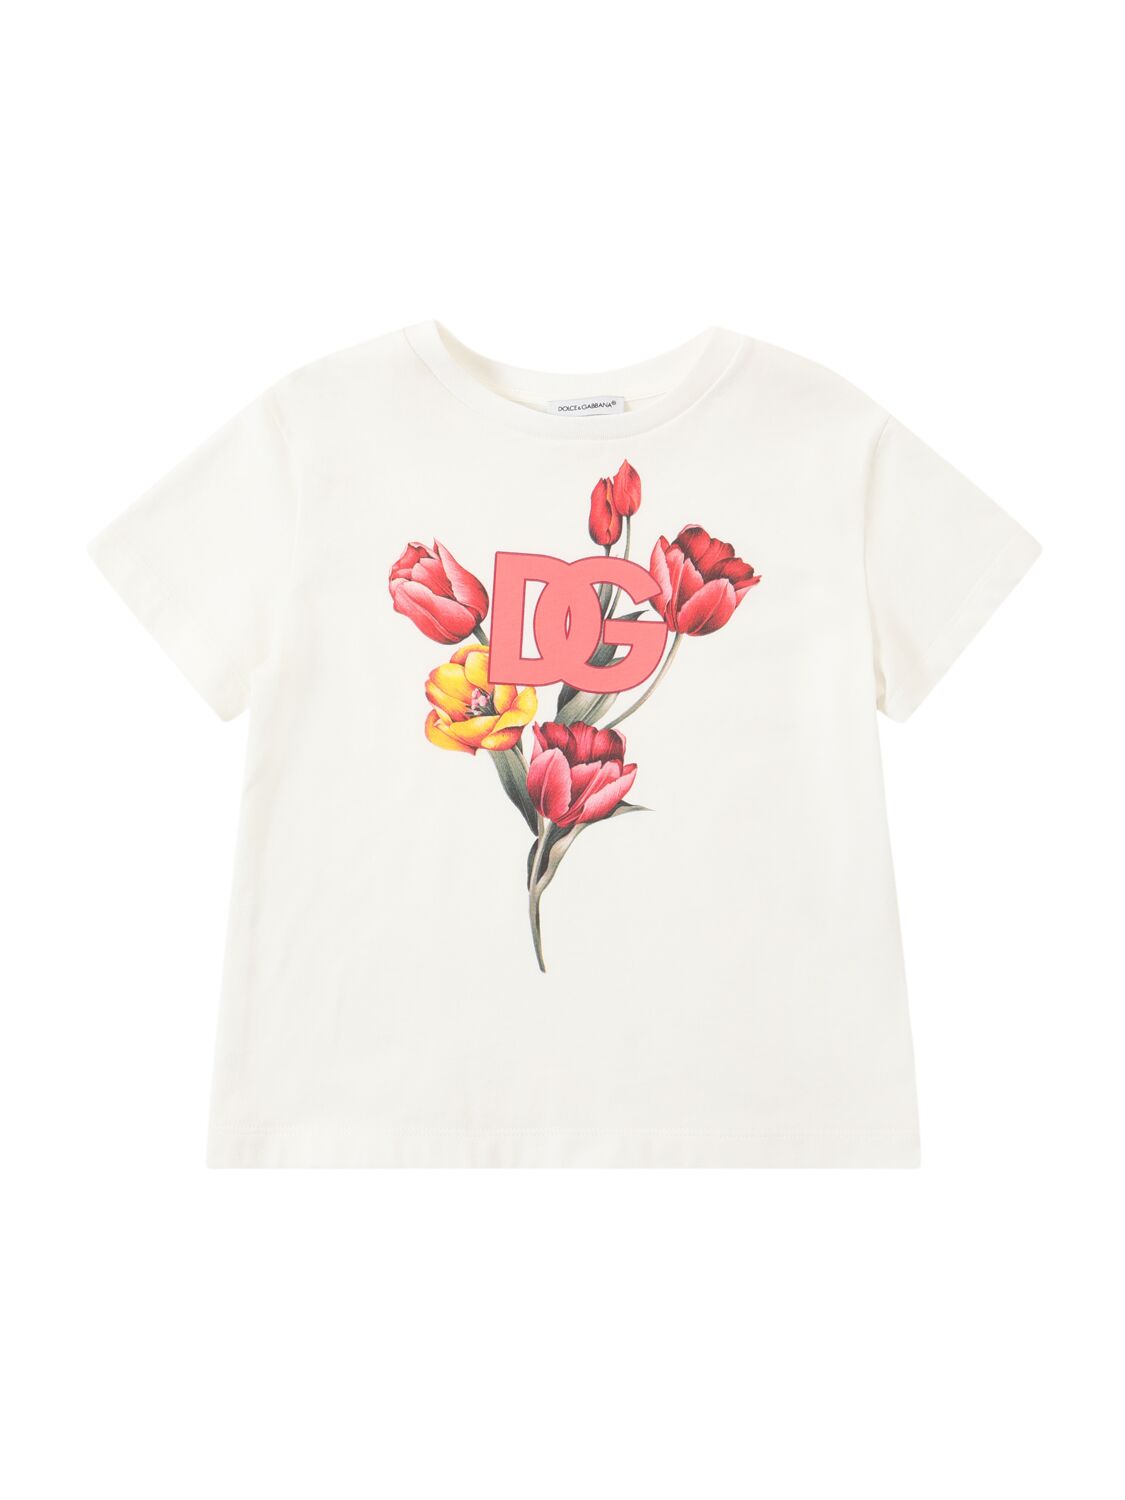 Dolce & Gabbana Printed Cotton Jersey T-shirt In White